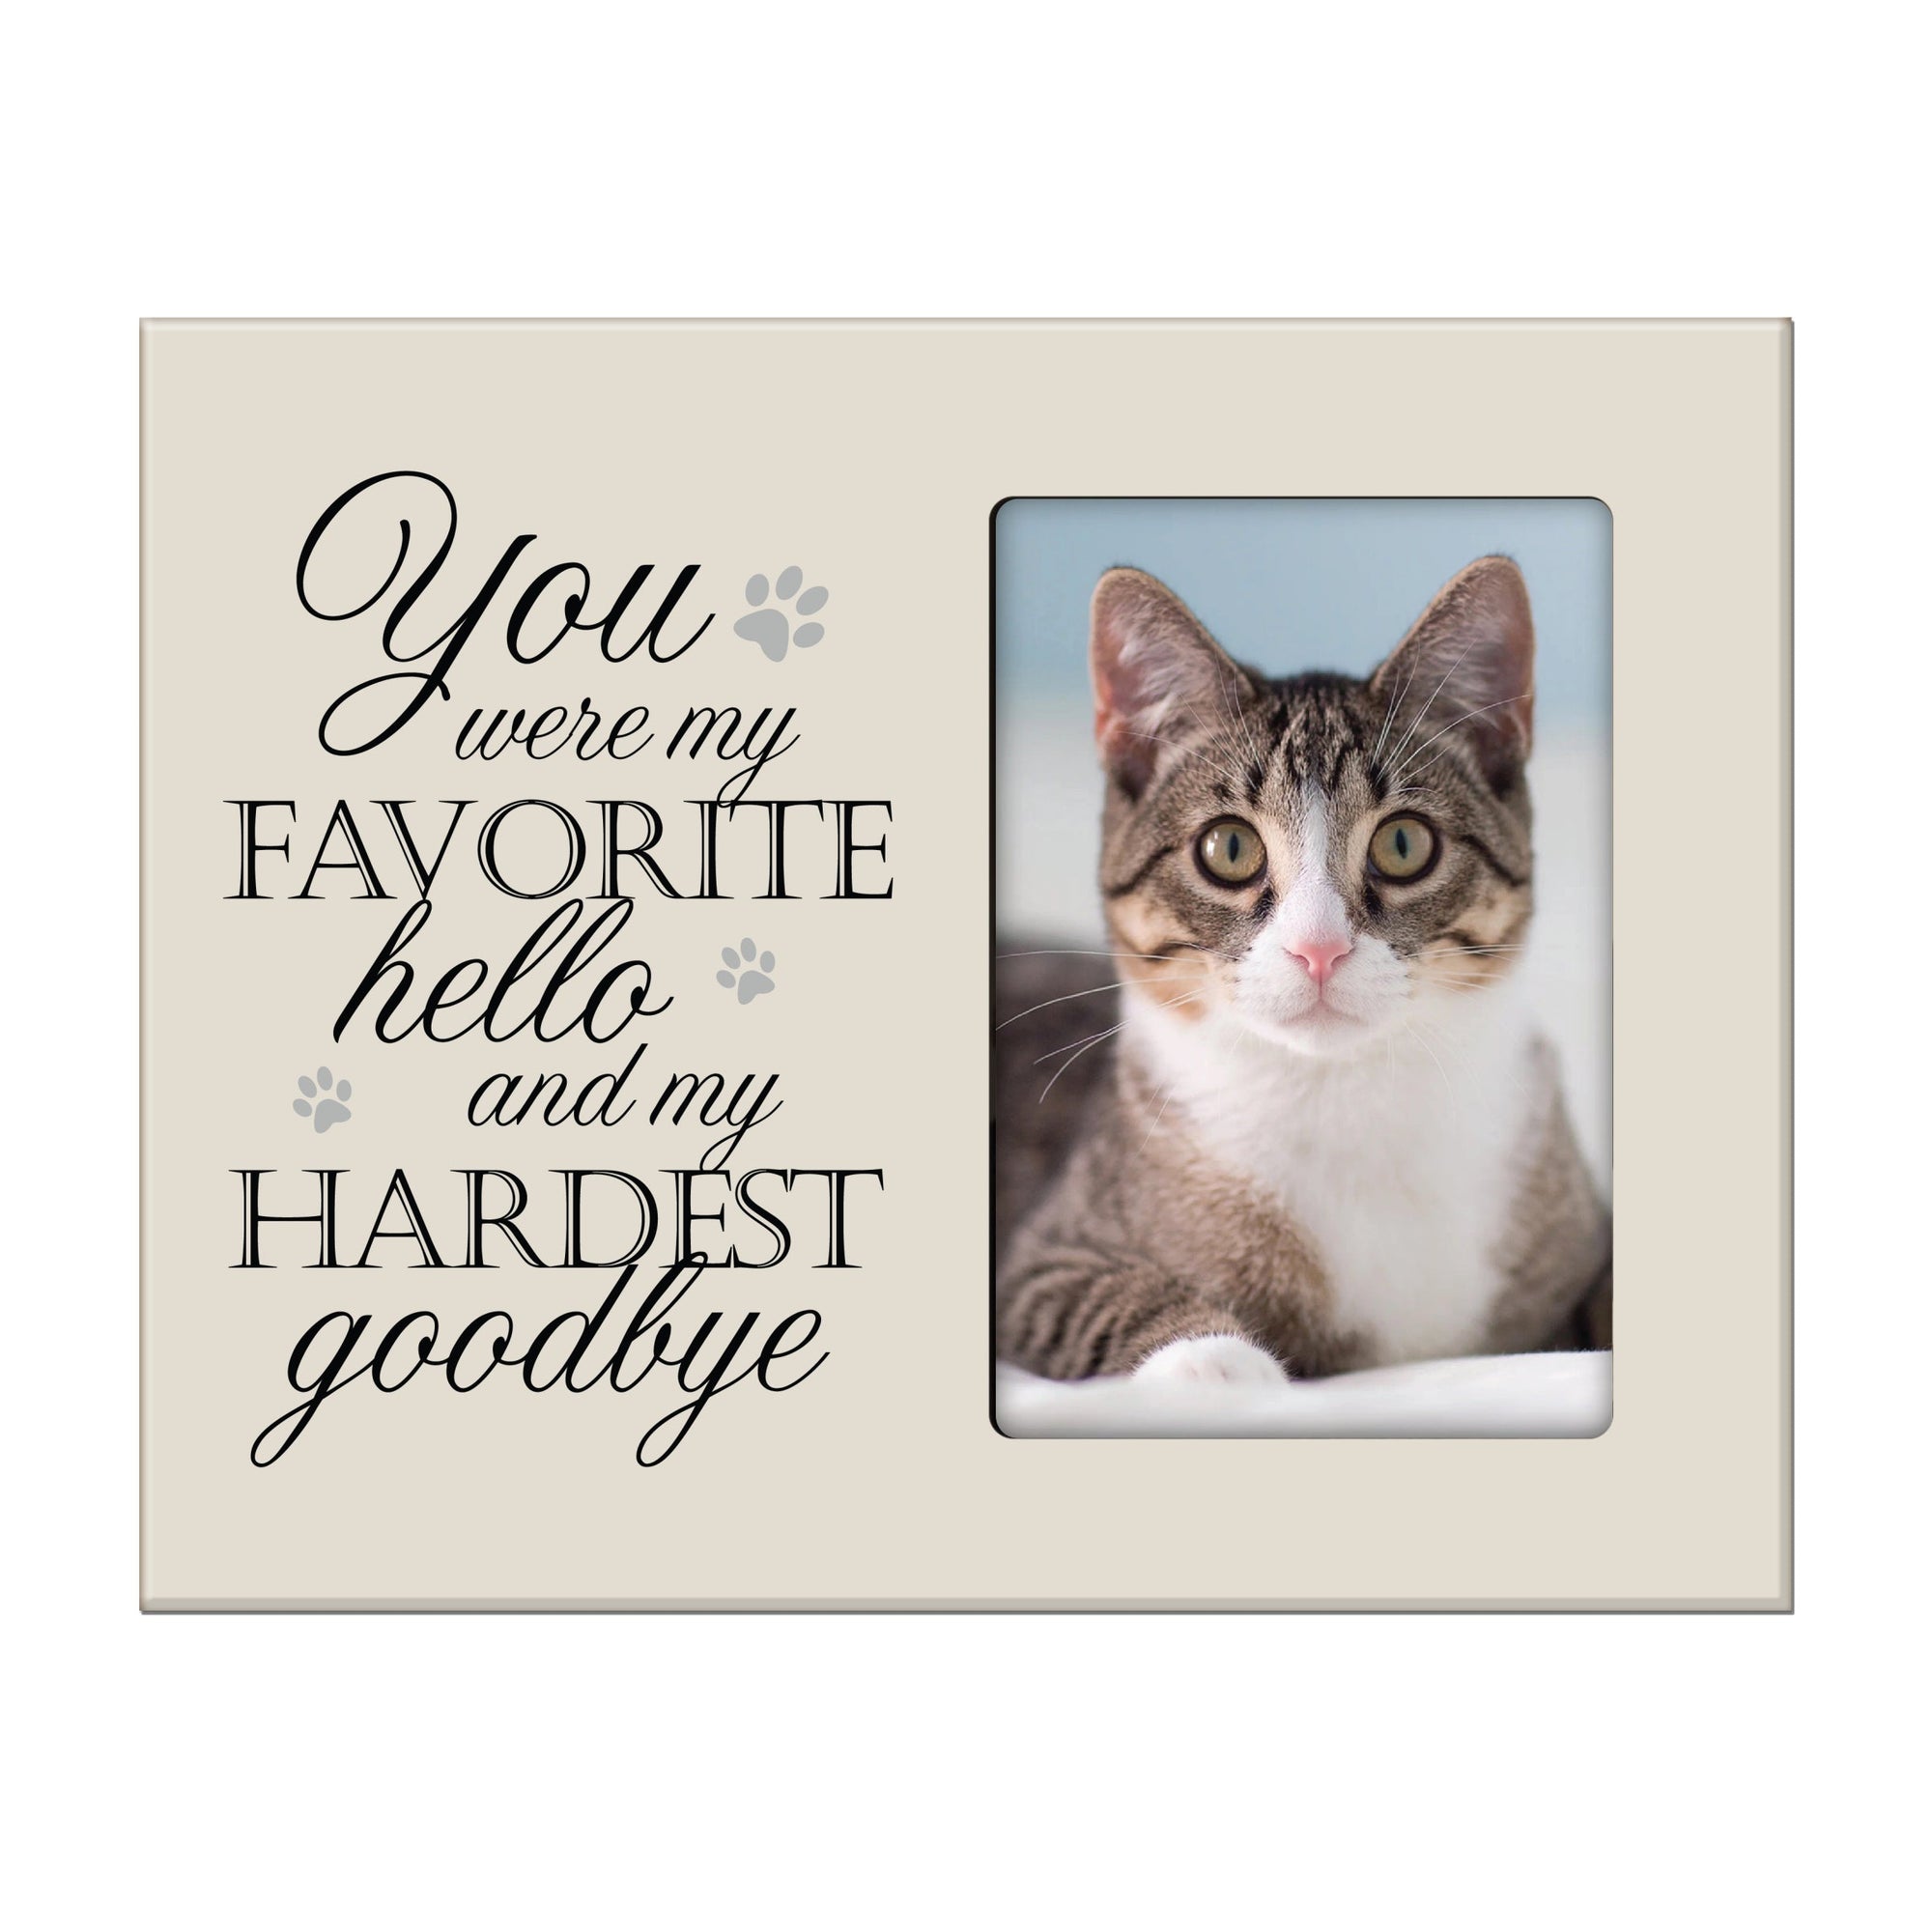 Memorial Photo Frames For The Loss Of Pets